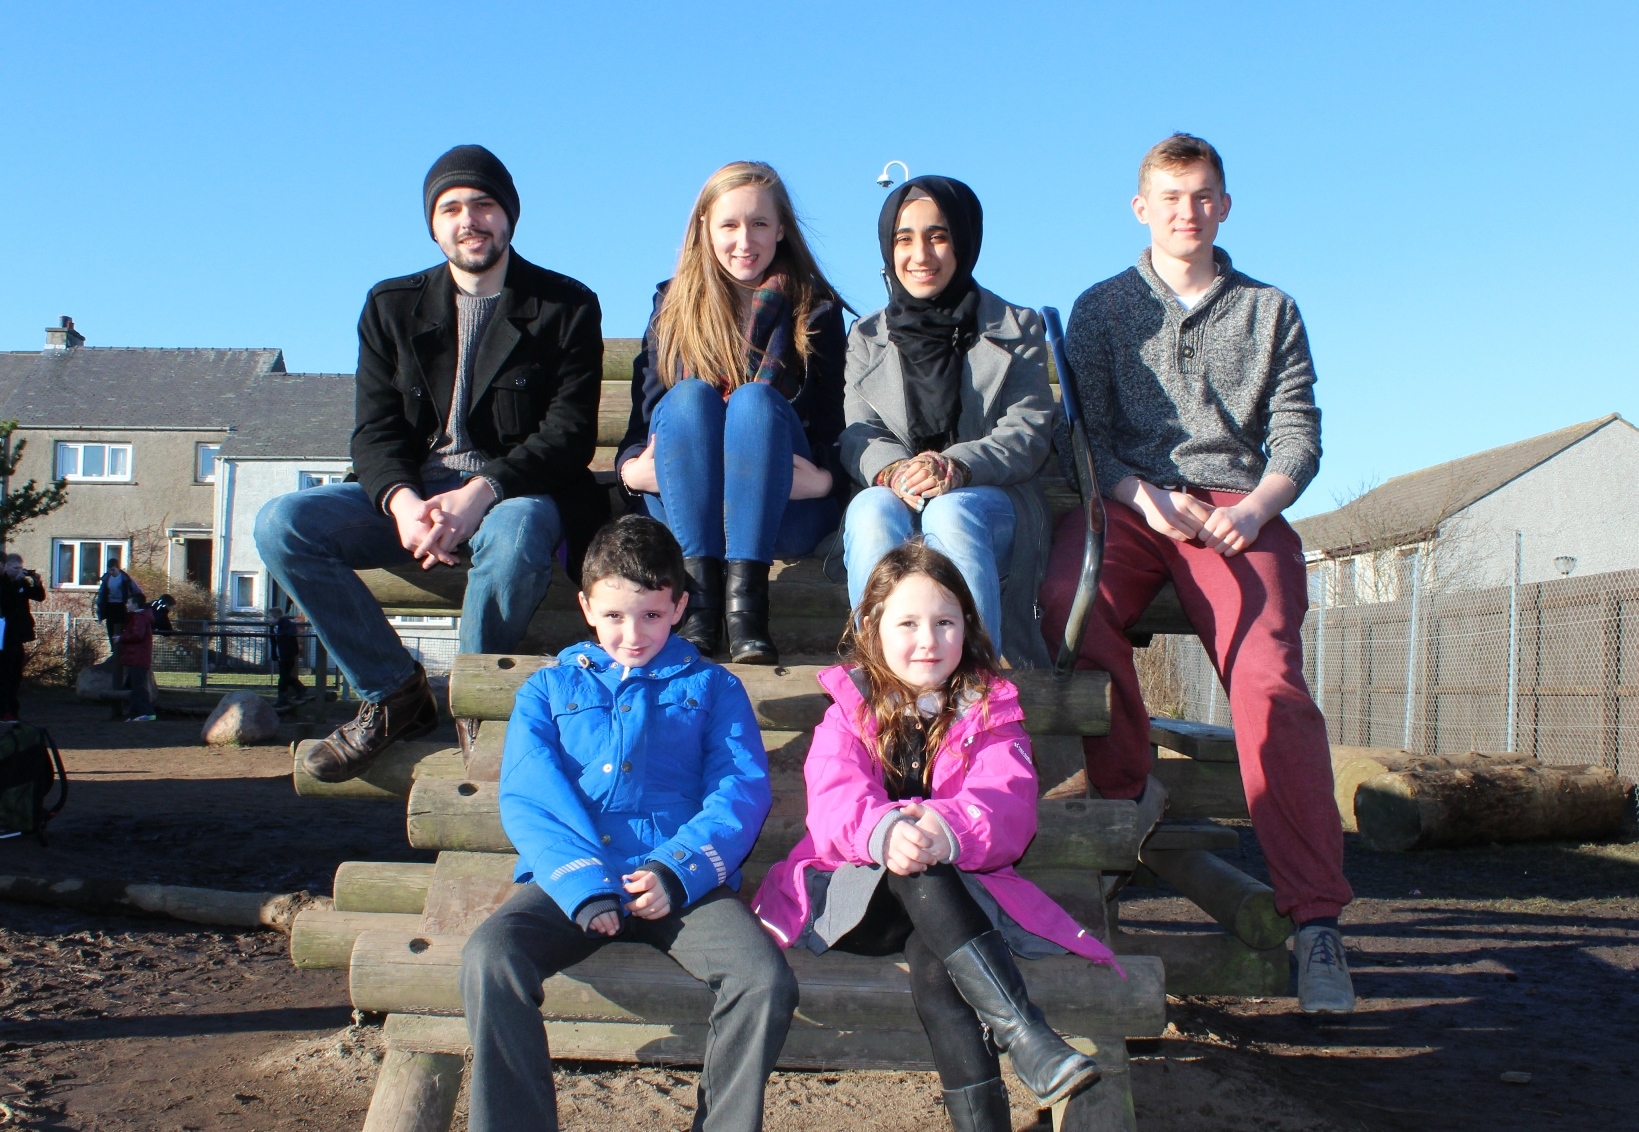 Students David Milne, Sophie Houston, Alaa Beruwien and Tom Perritt, with Portlethen youngsters Euan Brown and Lola McBeath.